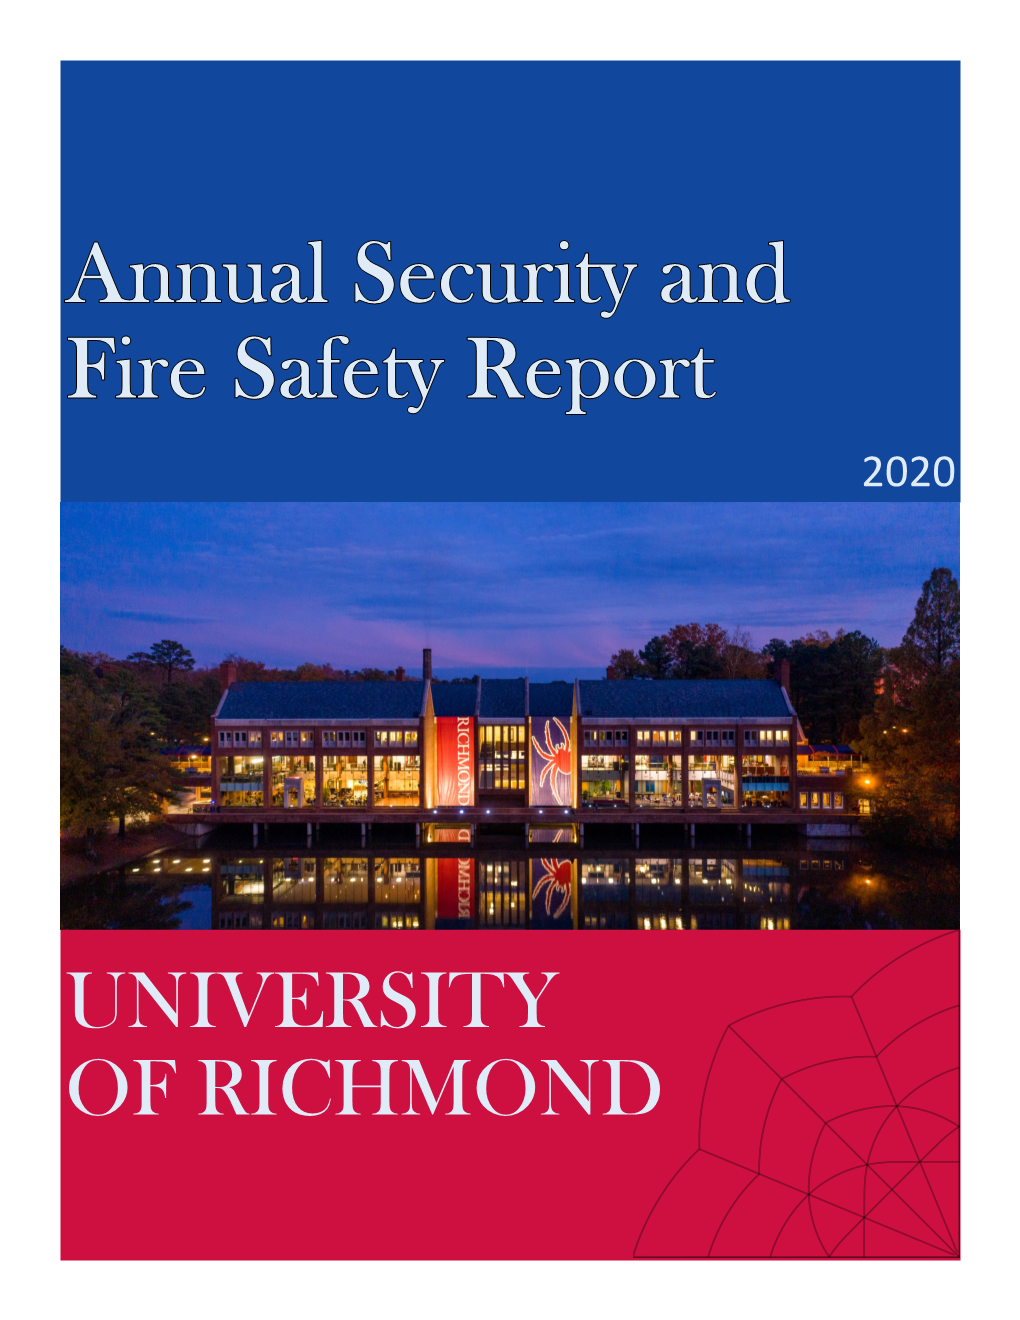 University of Richmond's Annual Security Report